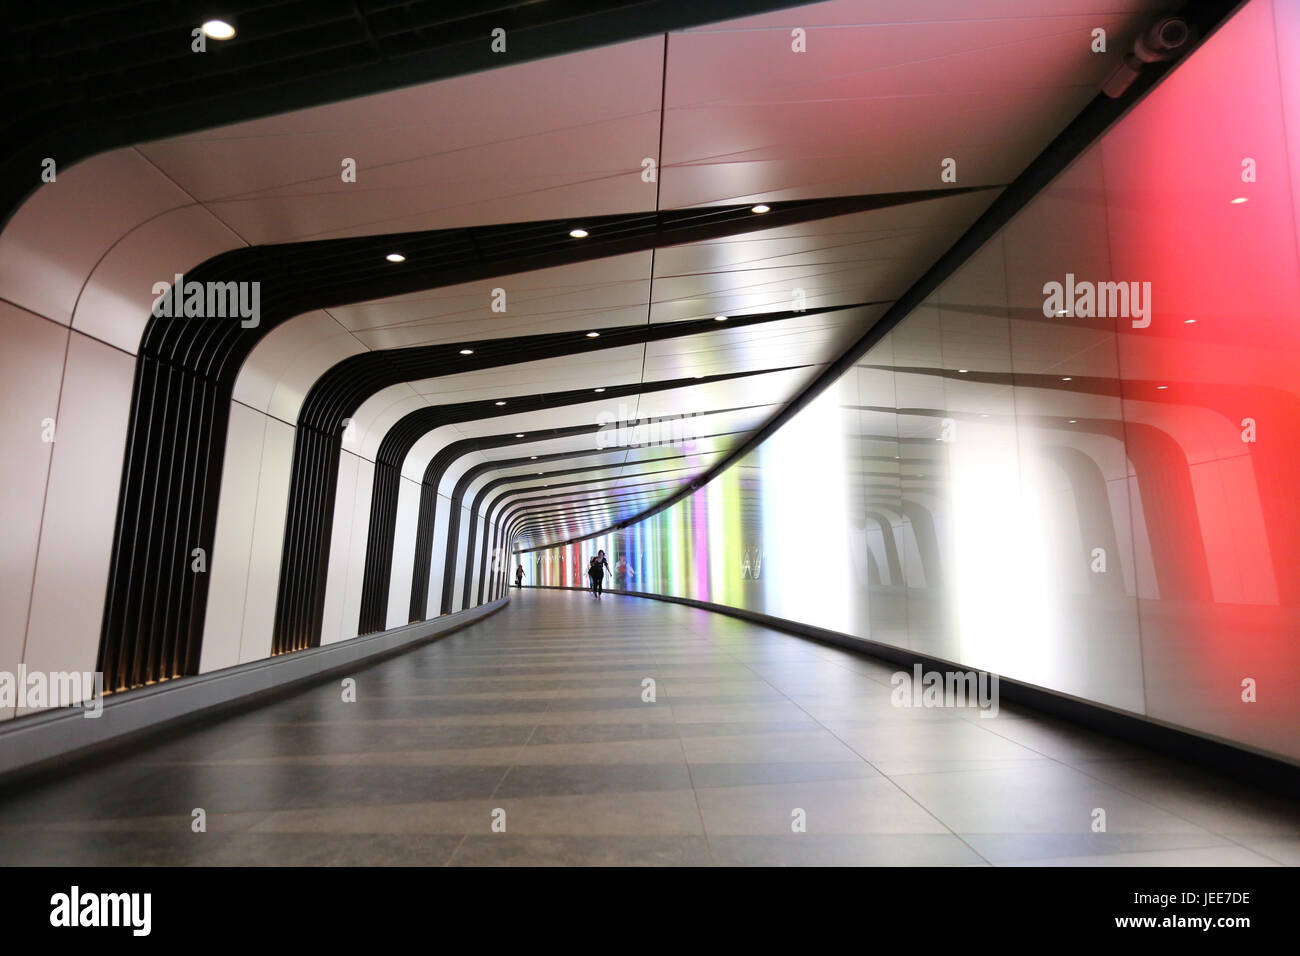 New passenger tunnel linking Kings Cross Underground station to the new St Pancras Square office development. Home to Google's new London HQ. Stock Photo